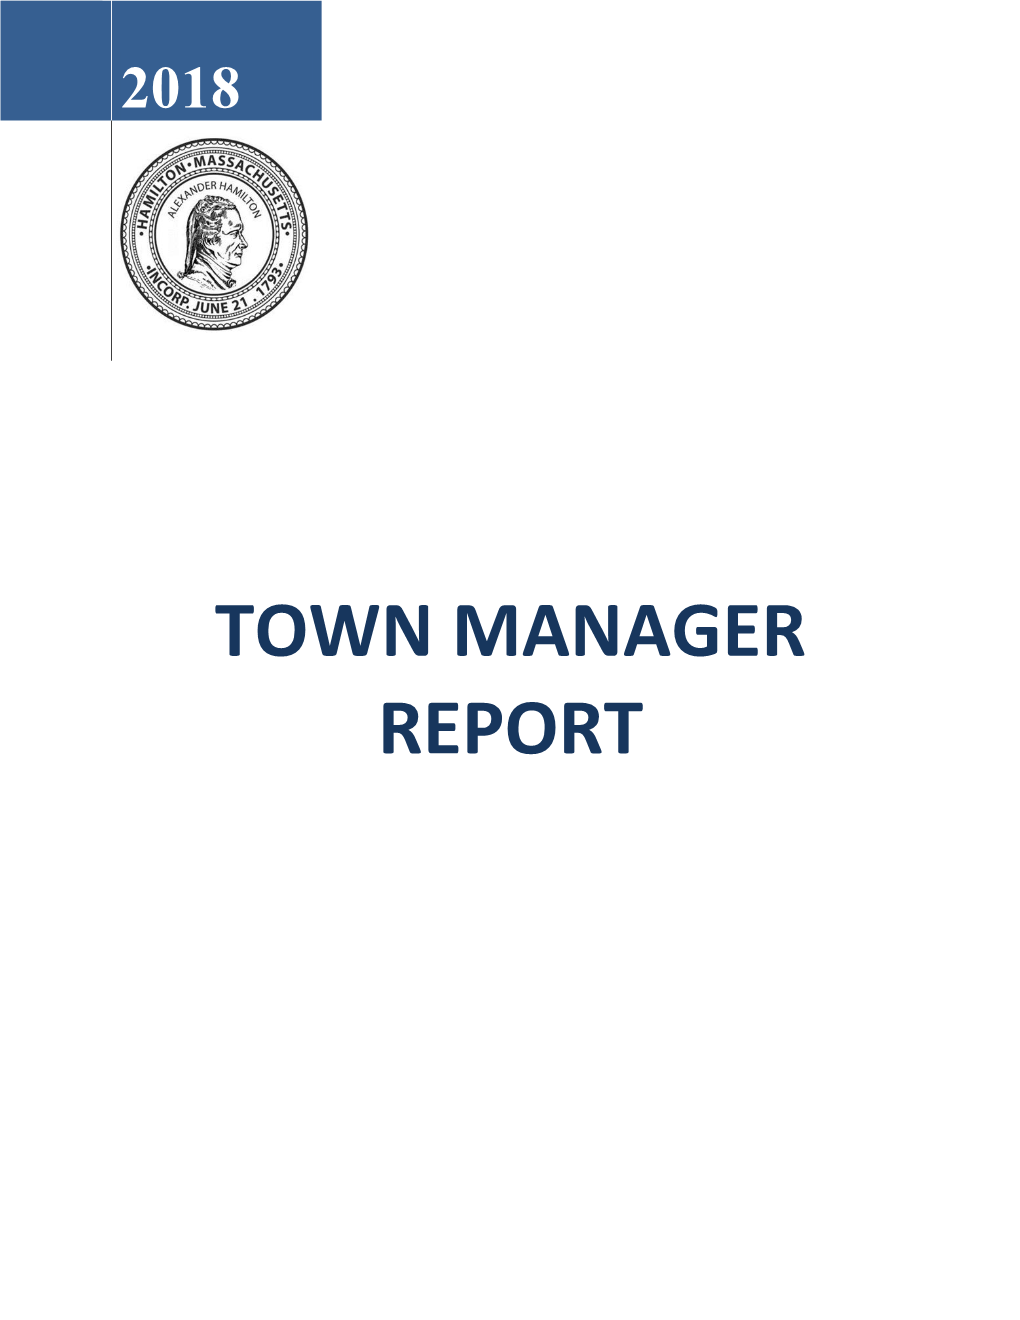 Town Manager Report